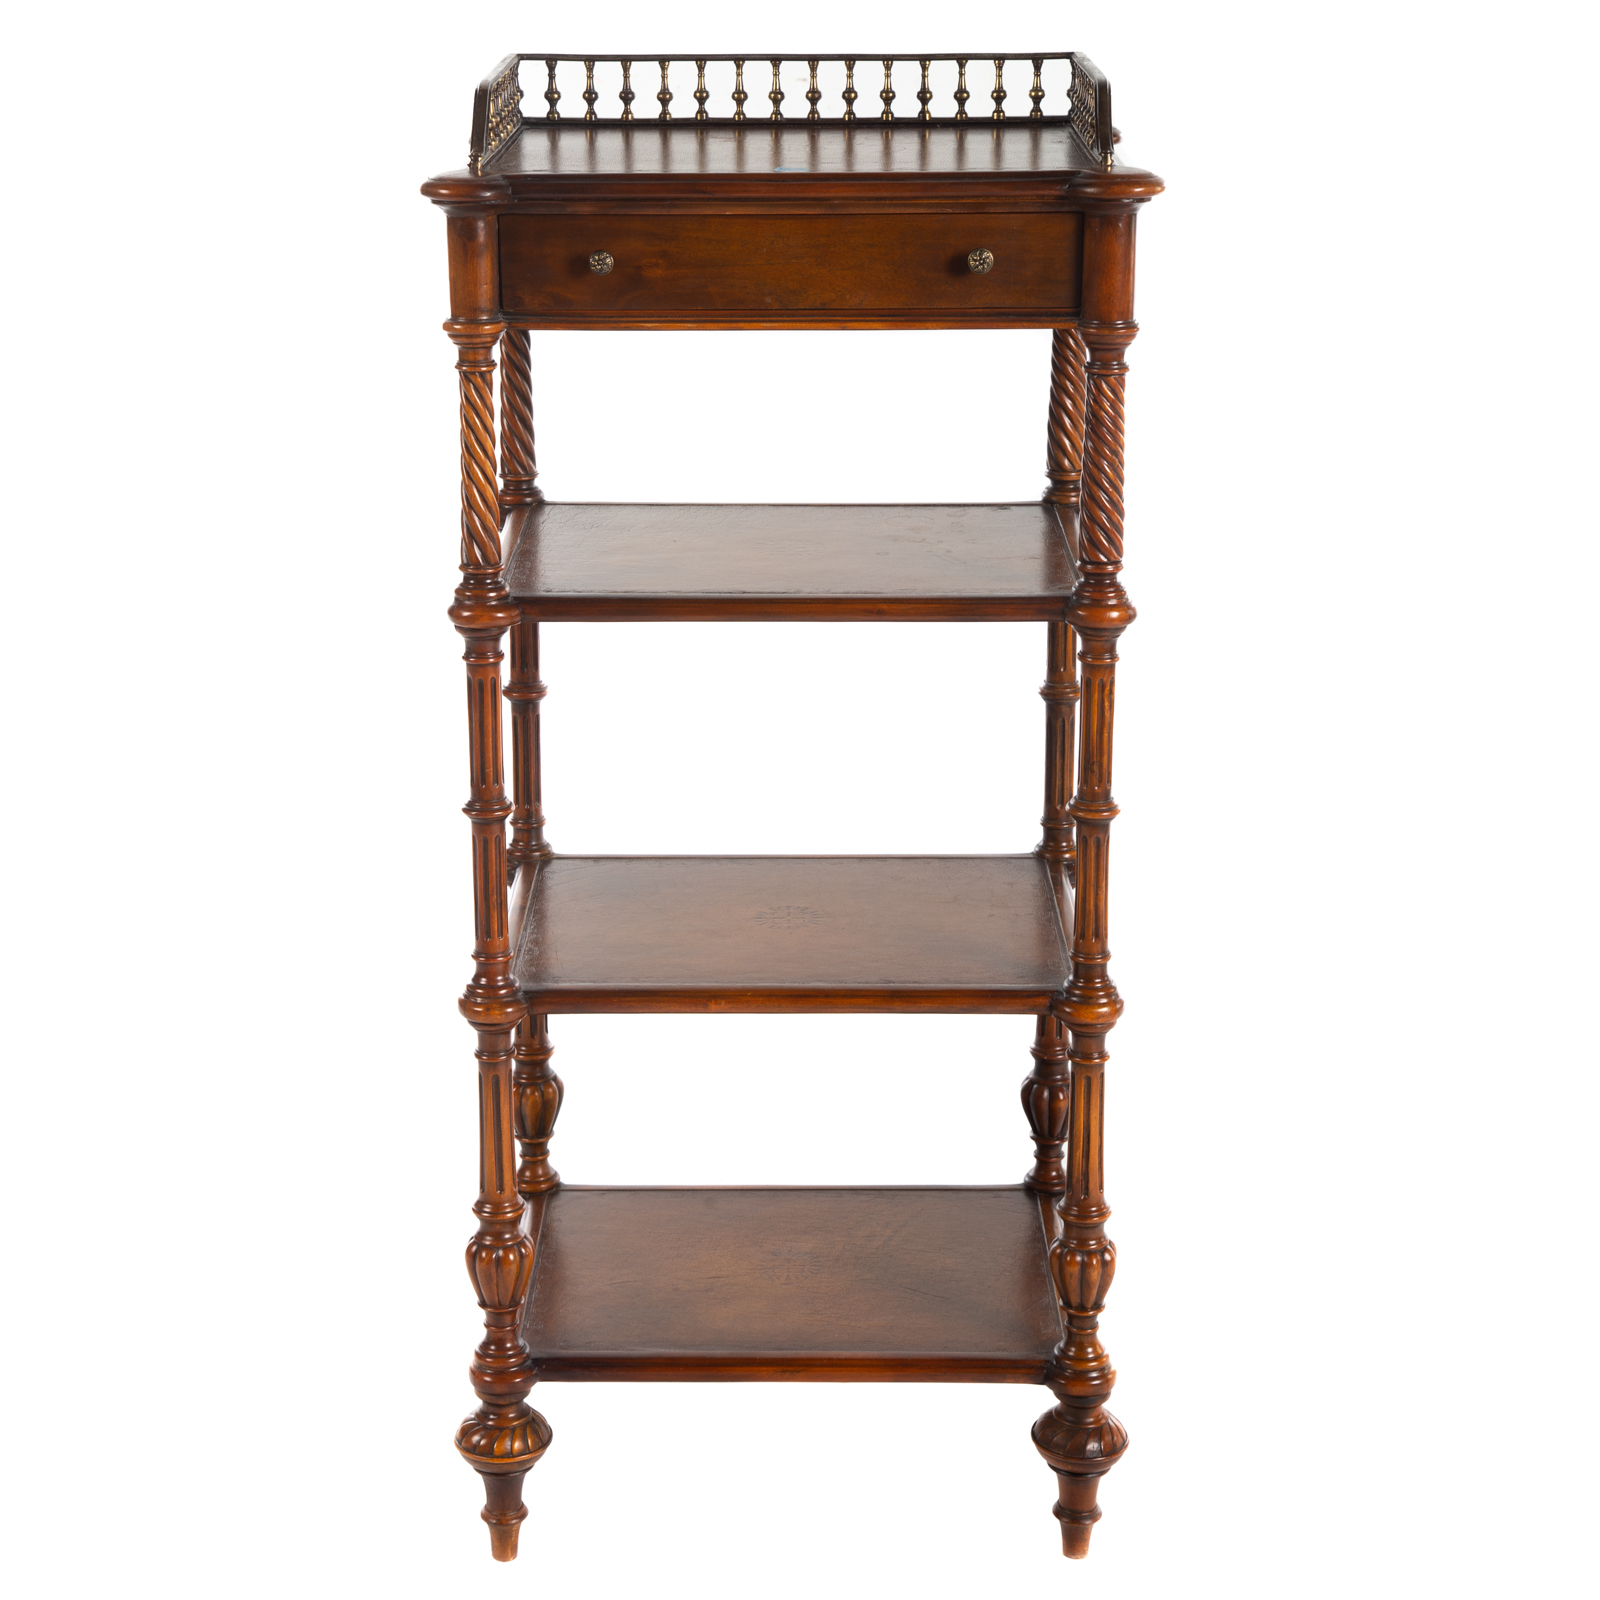 REGENCY STYLE LEATHER TOP ETAGERE 20th